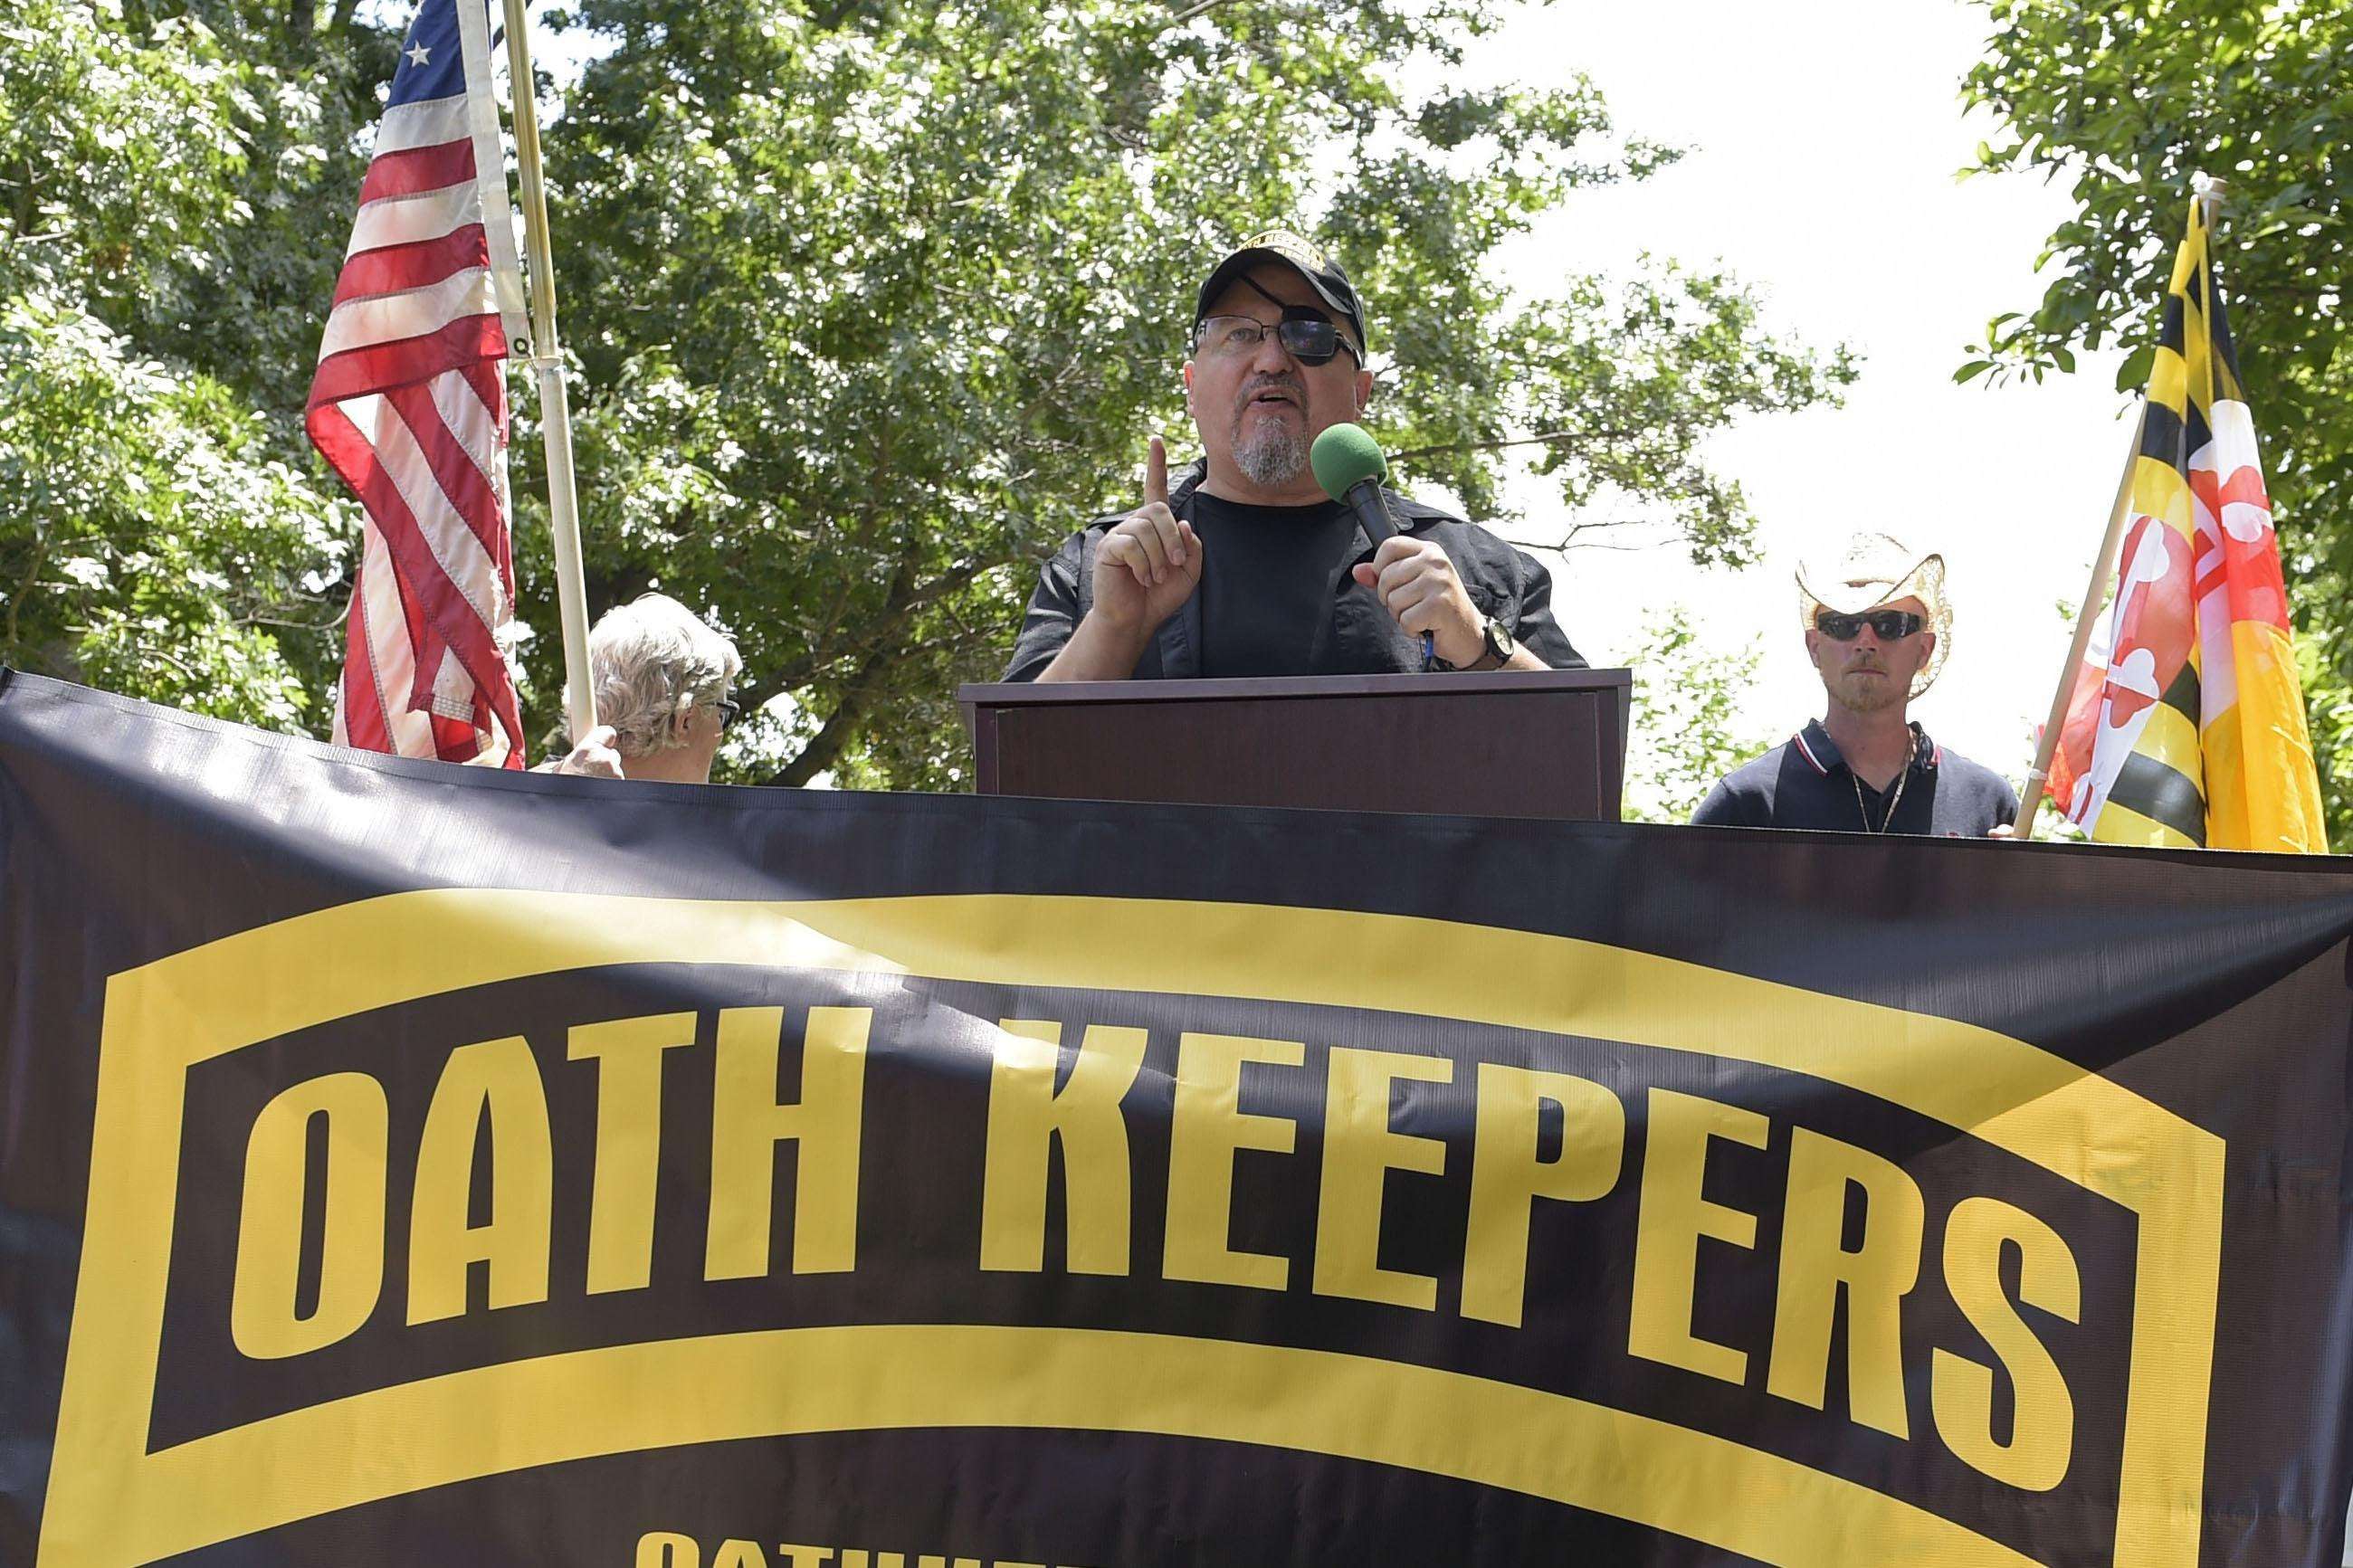 image for Elected officials, police chiefs on leaked Oath Keepers list